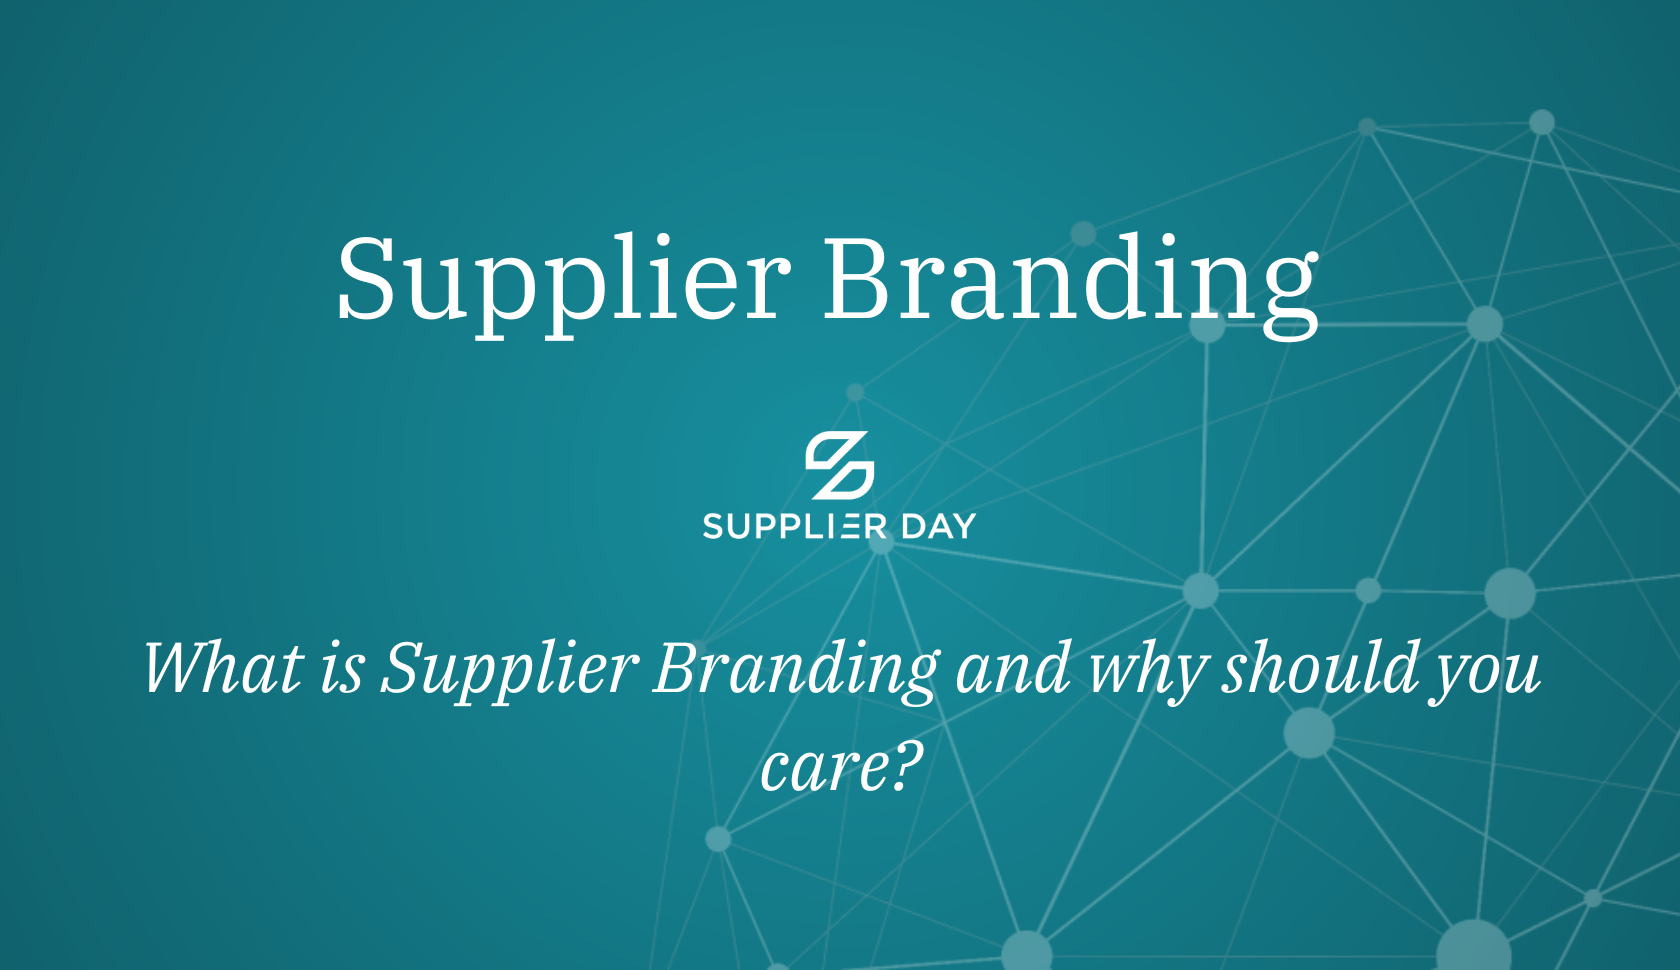 What is Supplier Branding and why should you care